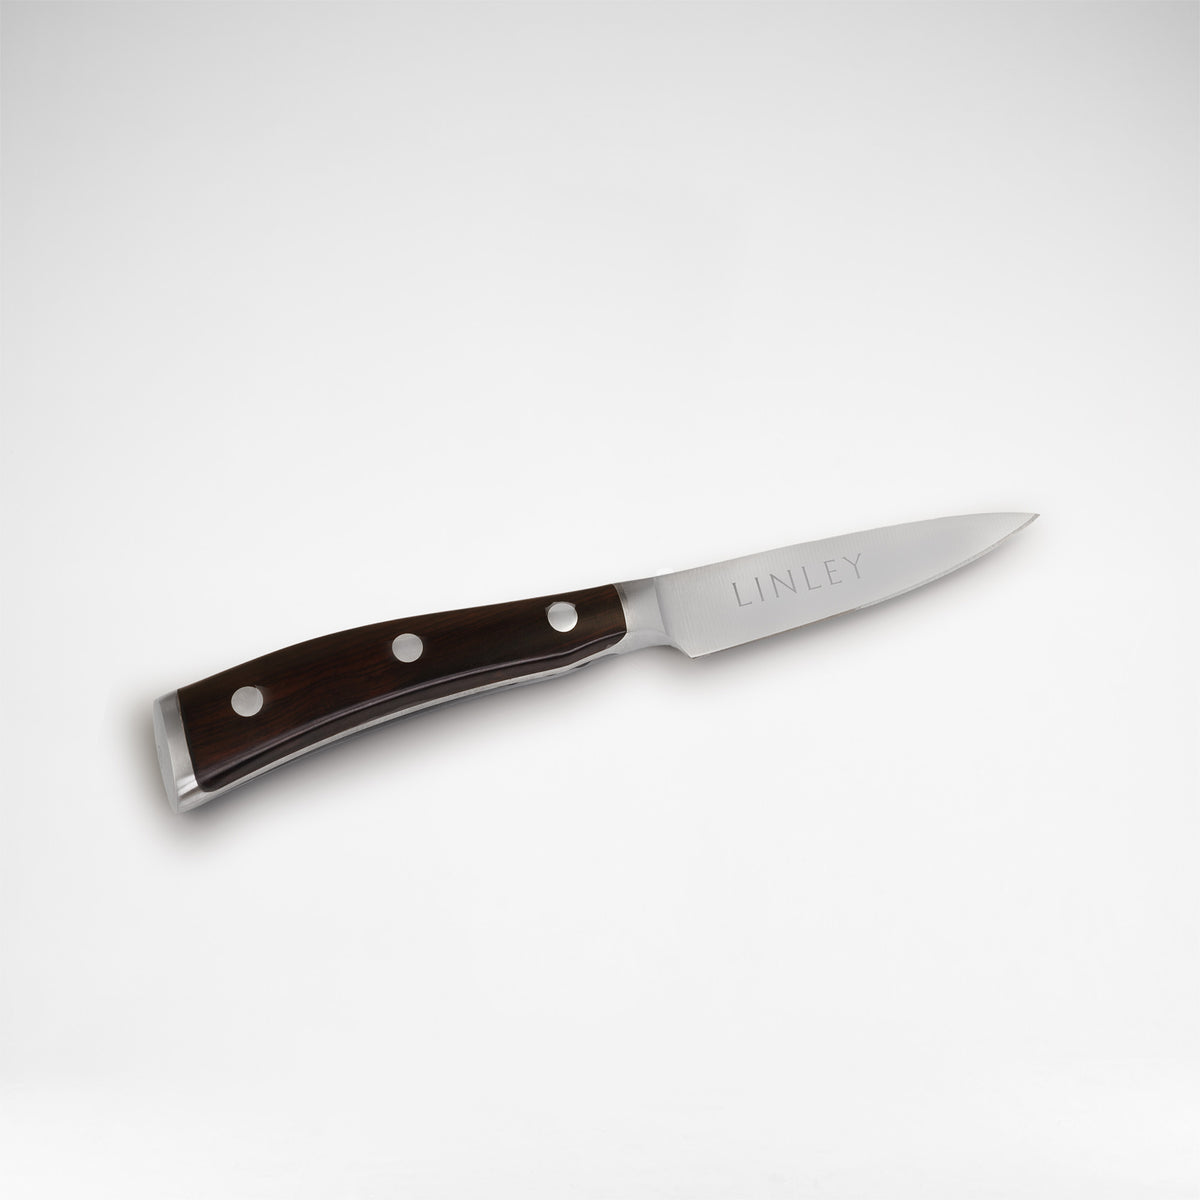 LINLEY Paring Knife